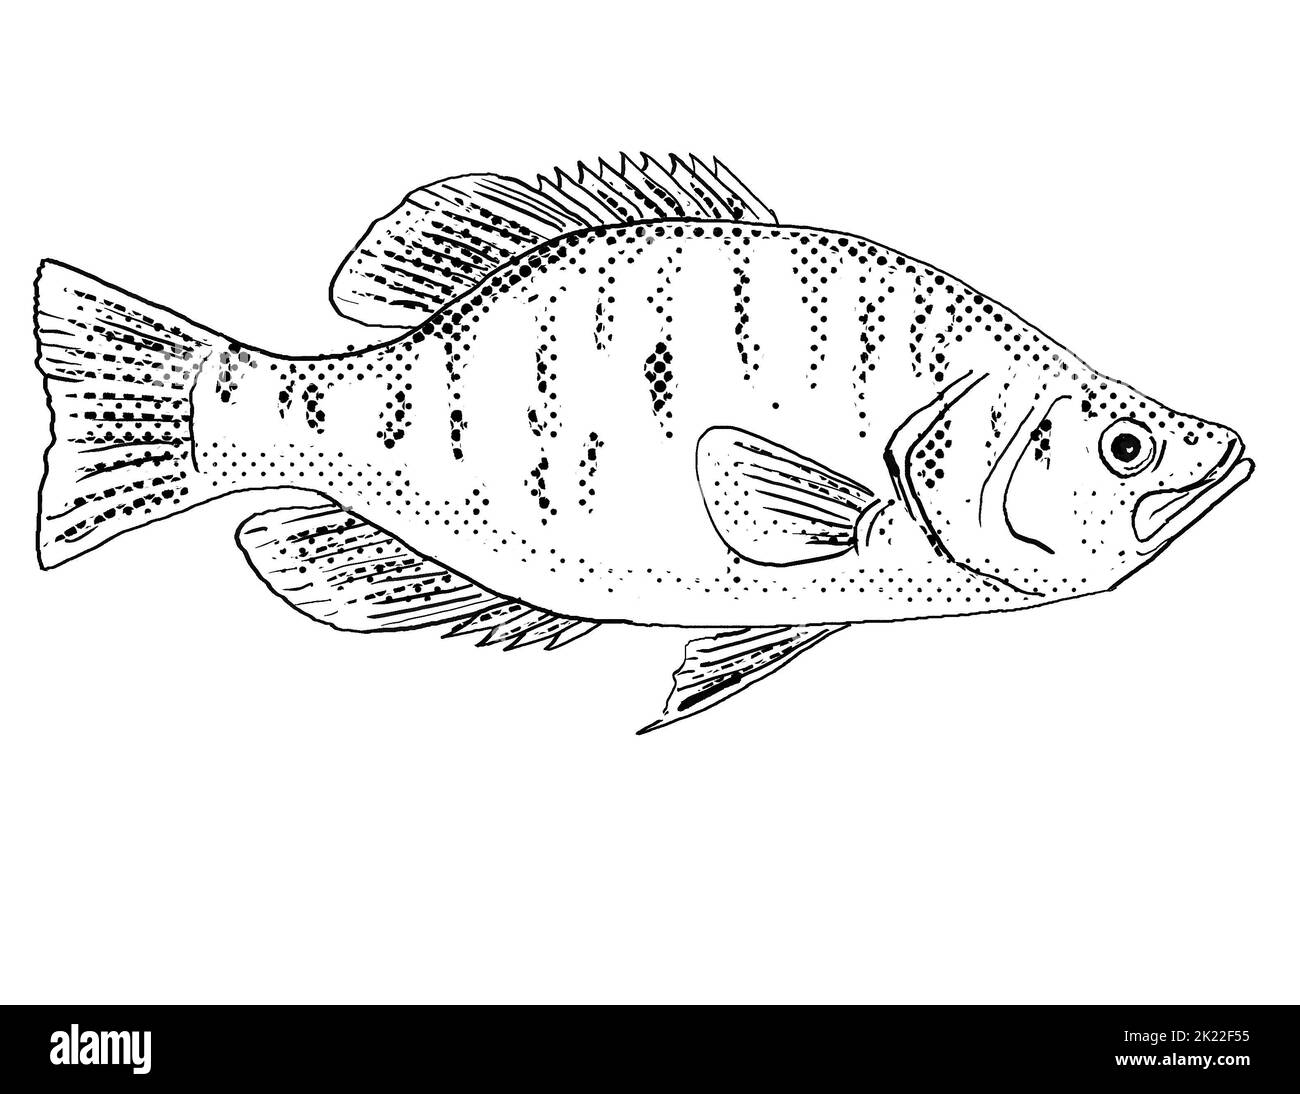 Cartoon style line drawing of a white crappie Pomoxis annularis, goldring or  silver perch a freshwater fish endemic to North America with halftone do Stock Photo